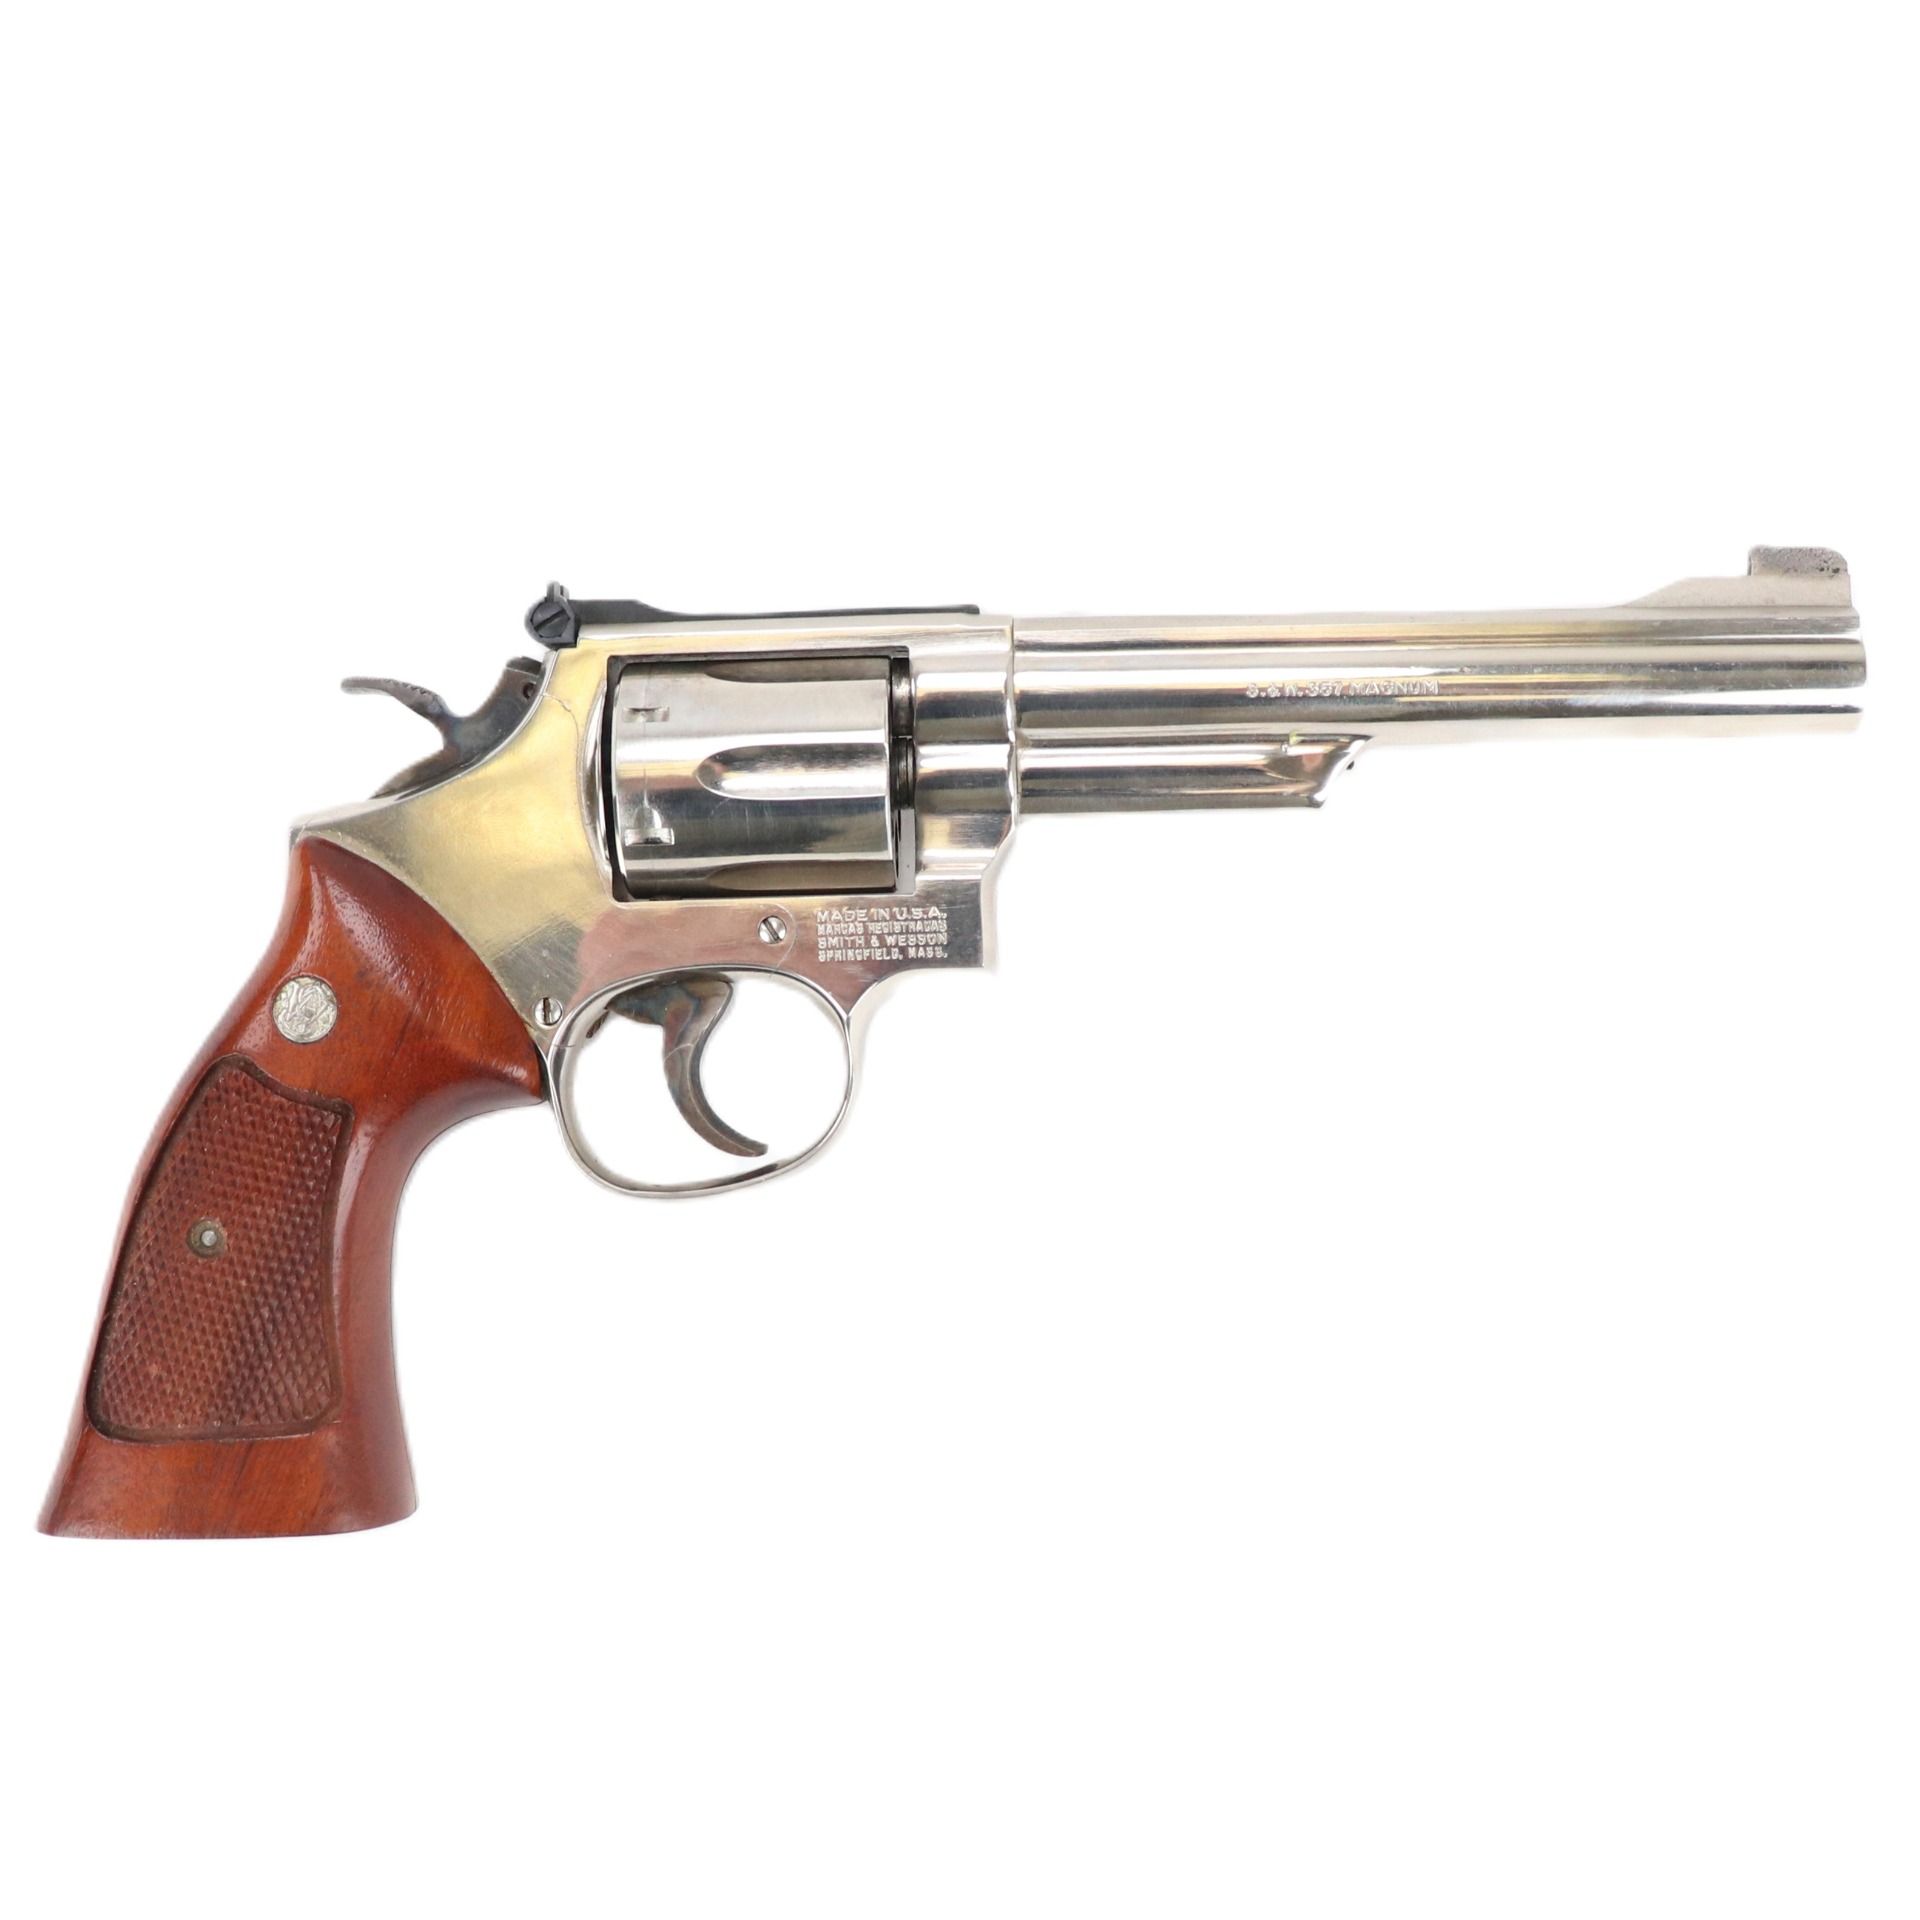 USED - Smith & Wesson 19-5 GTO370973